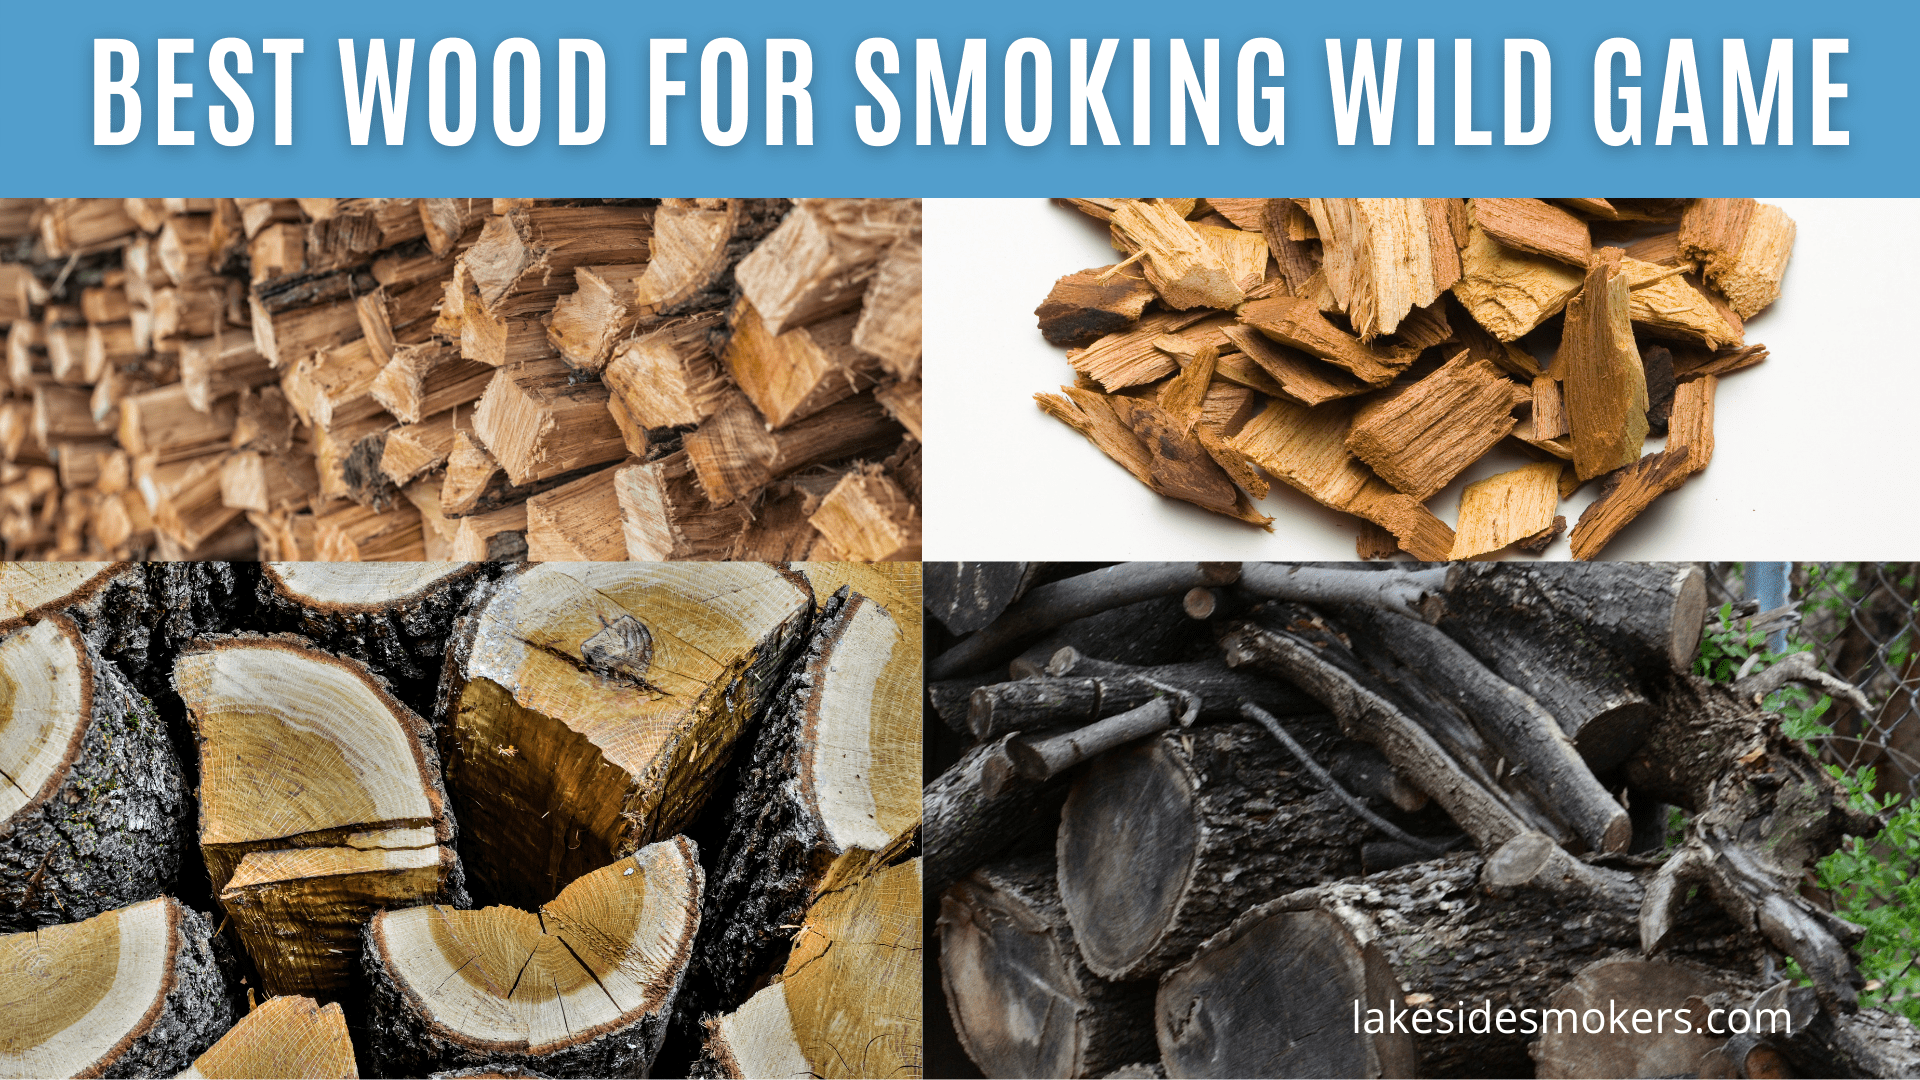 Best wood for smoking wild game | How to make the flavors blend well